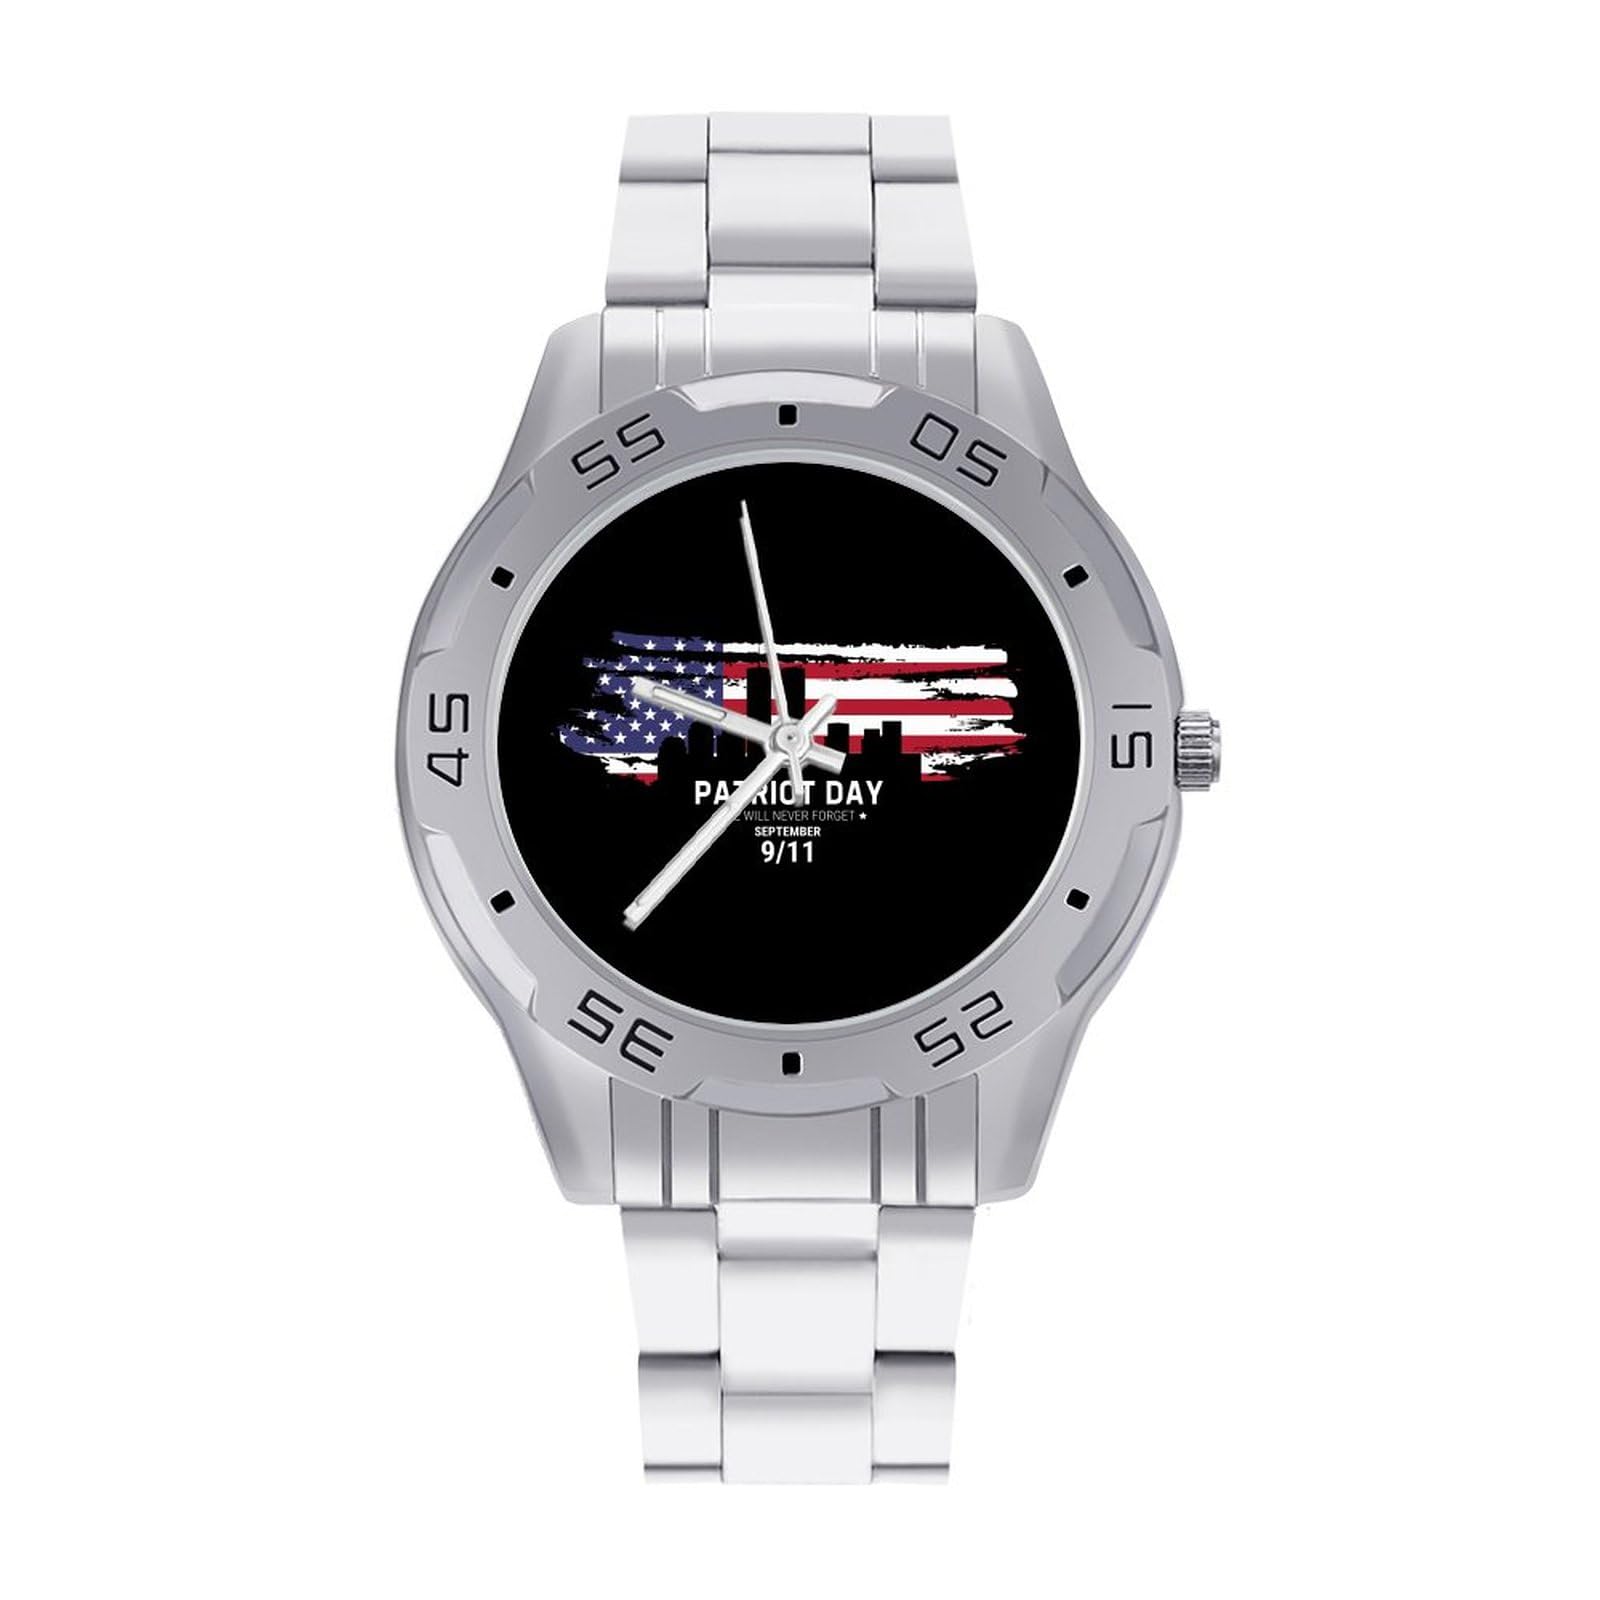 911 Remember Never Forget Stainless Steel Band Business Watch Dress Wrist Unique Luxury Work Casual Waterproof Watches